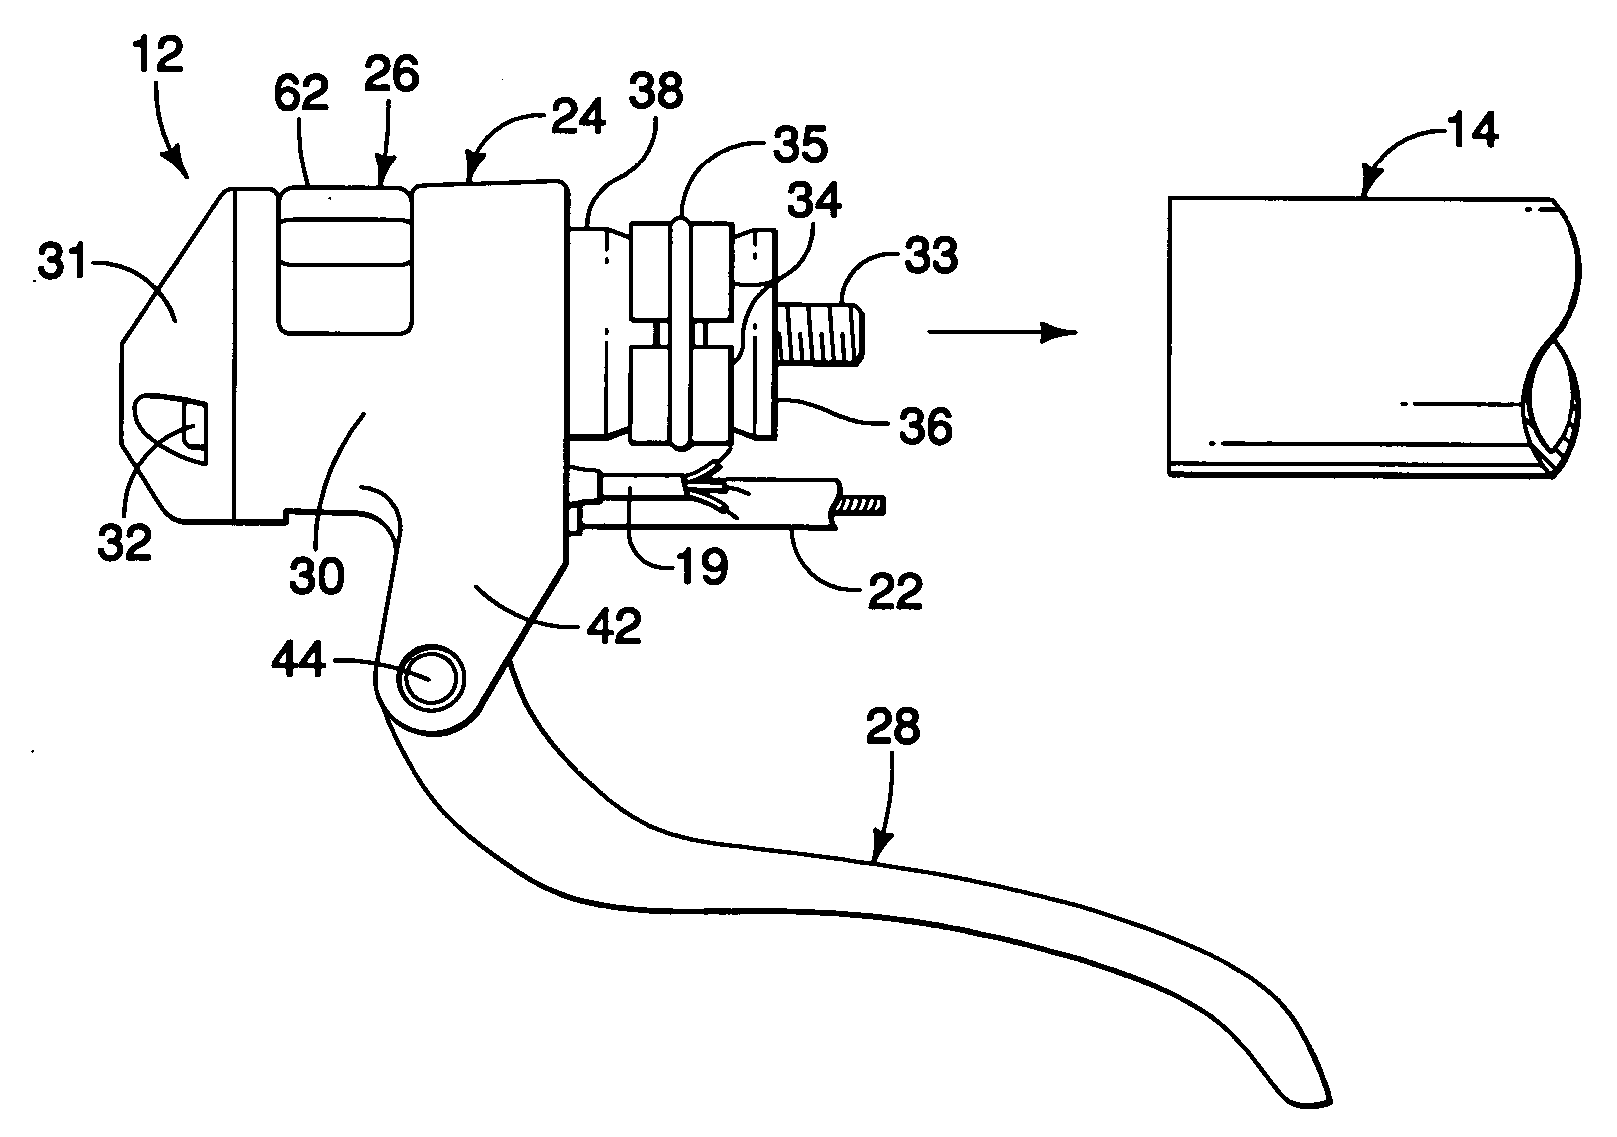 Bicycle control device